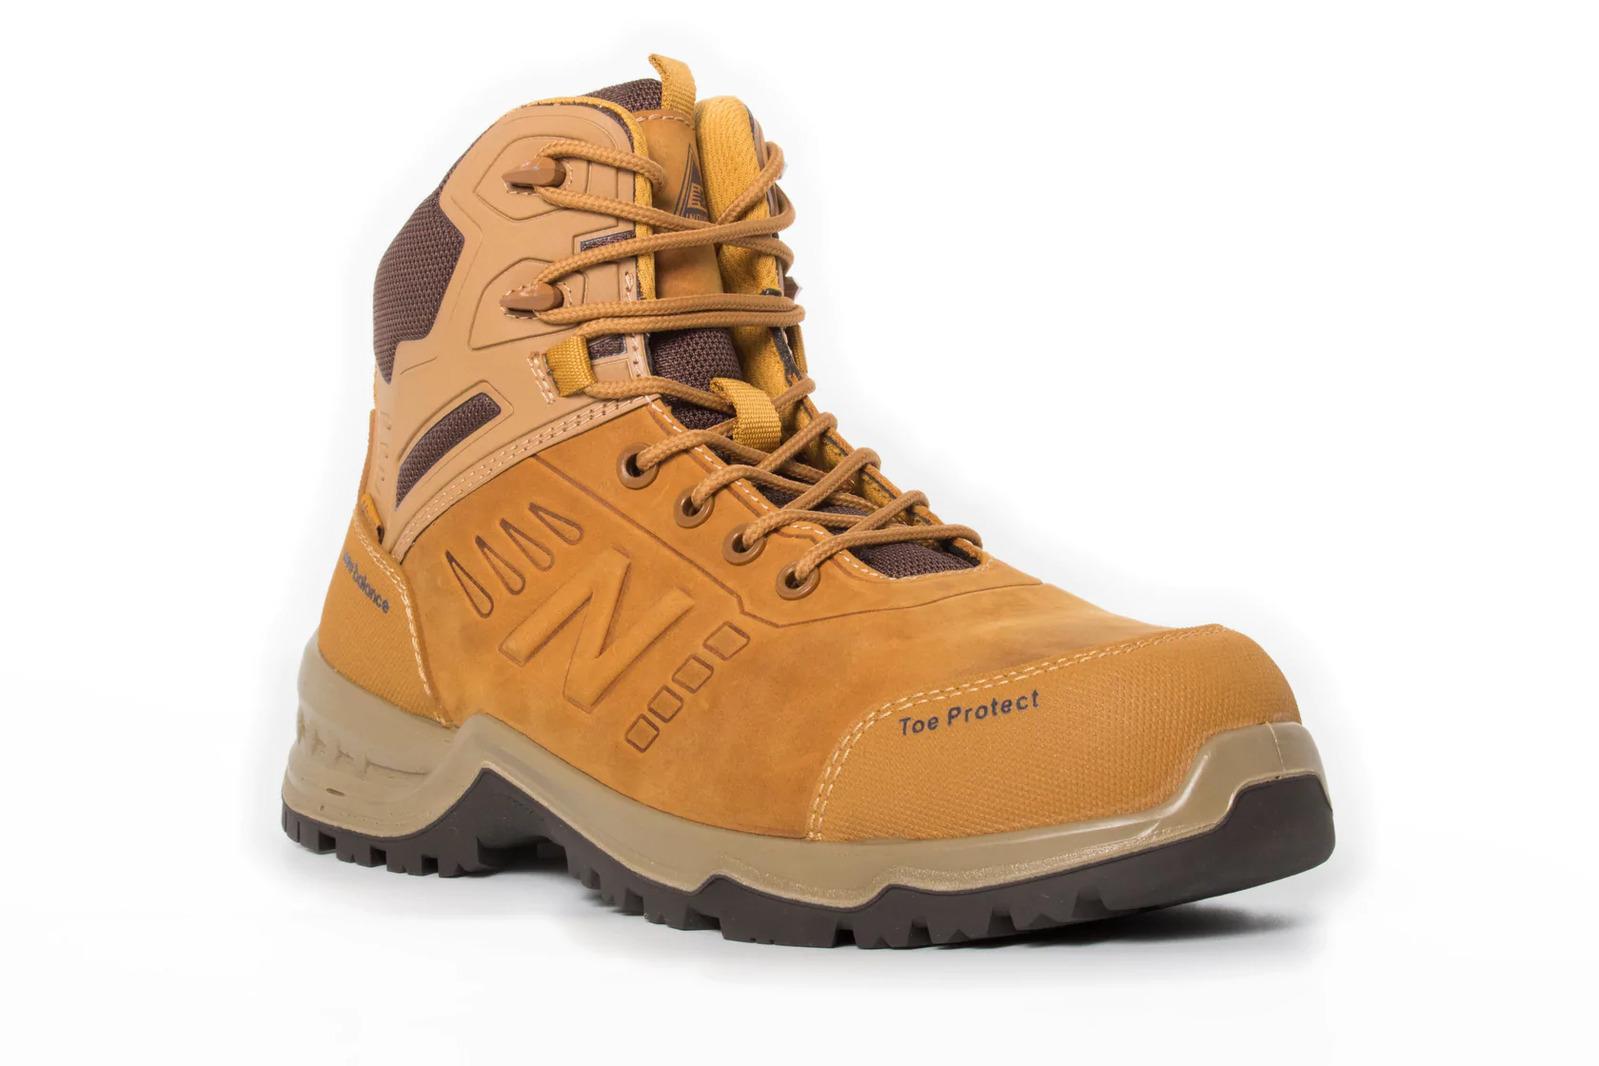 New Balance Mens Contour Steel Toe Cap Safety Work Boots with Zip - Wheat - US 8 Width:4E